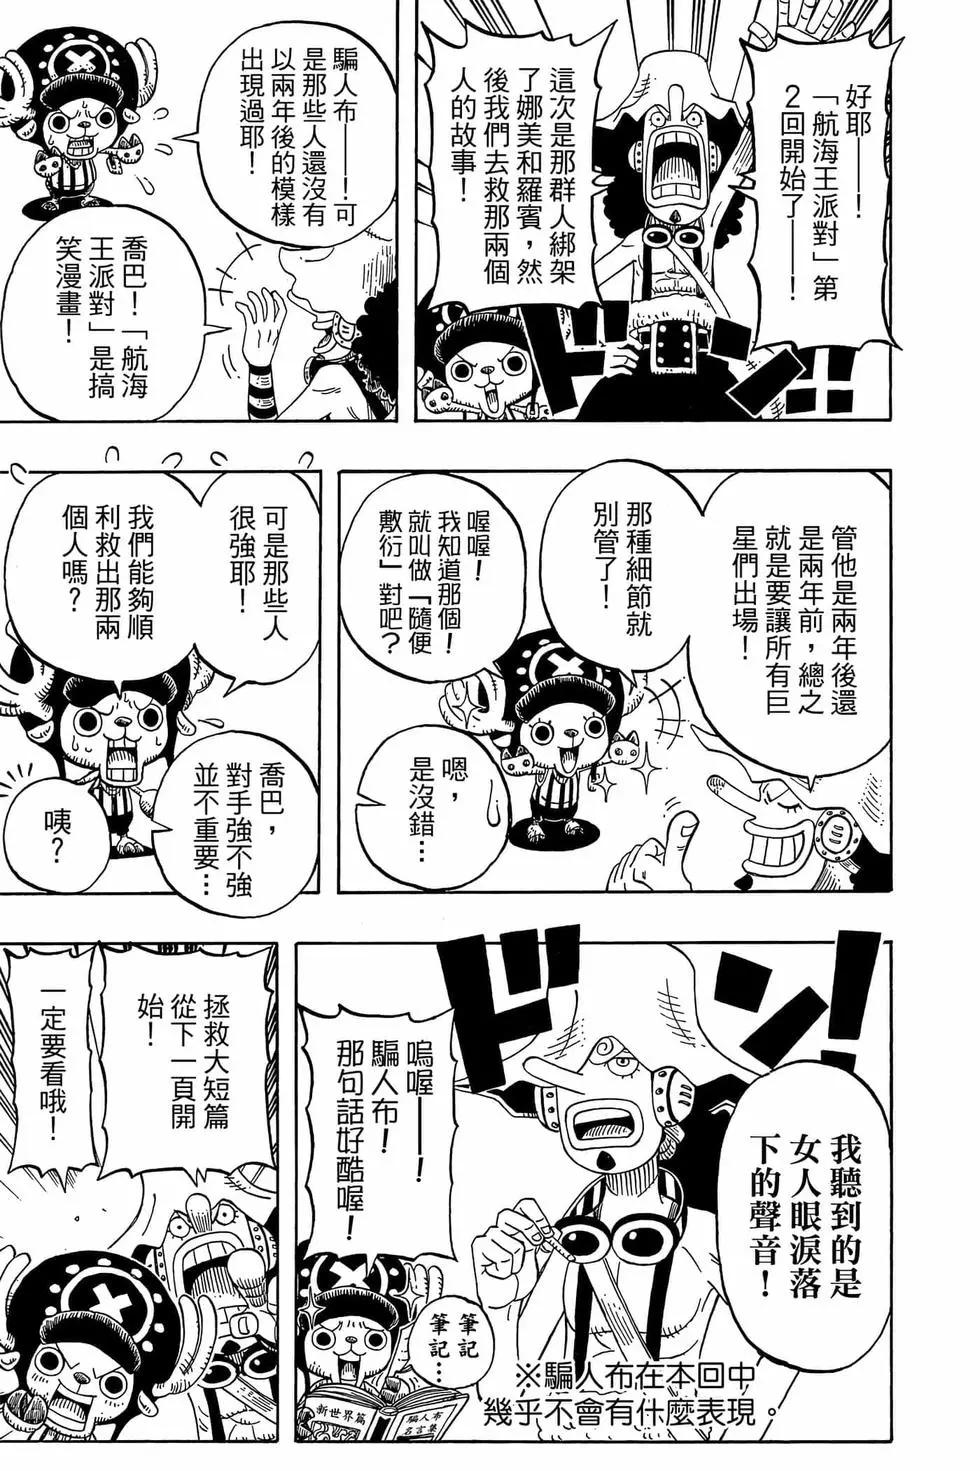 One piece party - 第01卷(1/4) - 2